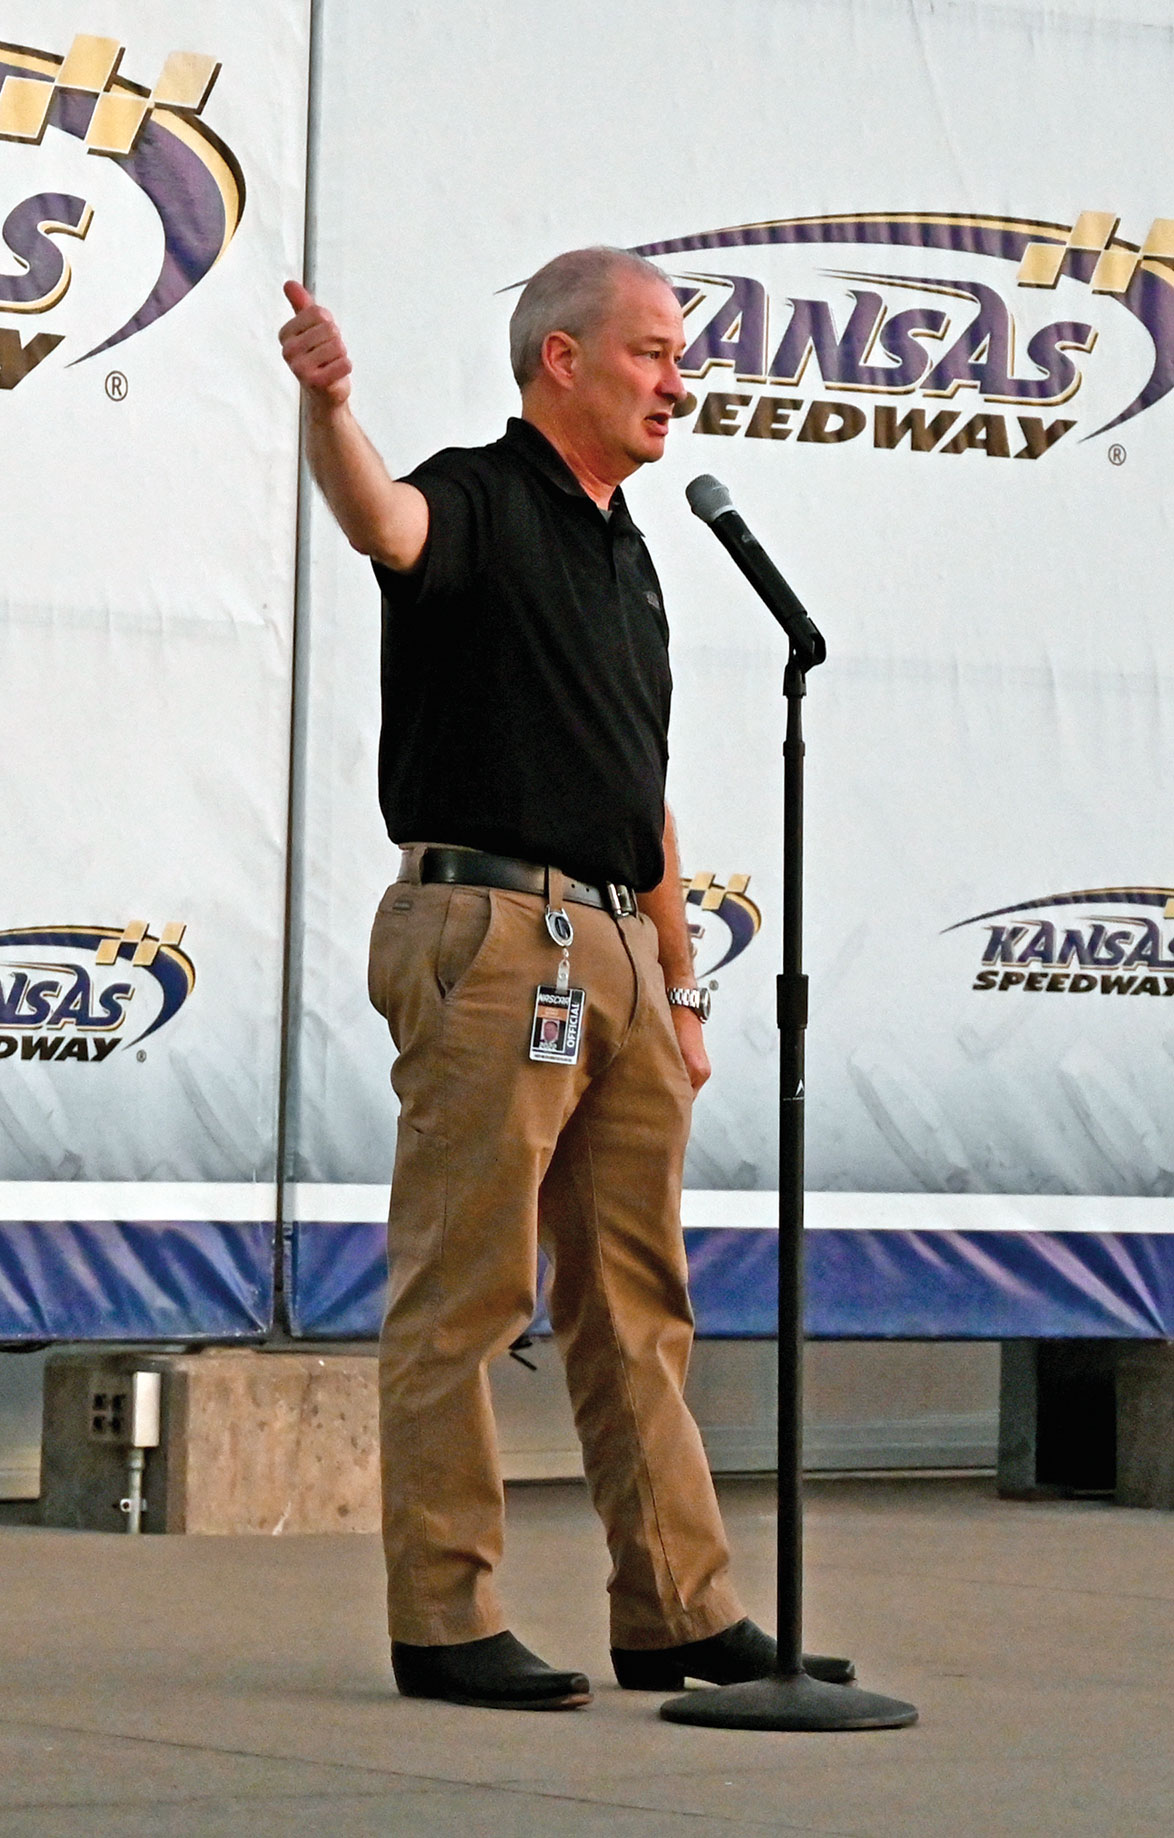 Kansas Speedway President and CGSC Foundation trustee Pat Warren welcomes guests to the track during the CGSC Foundation event on Oct. 21, 2022.